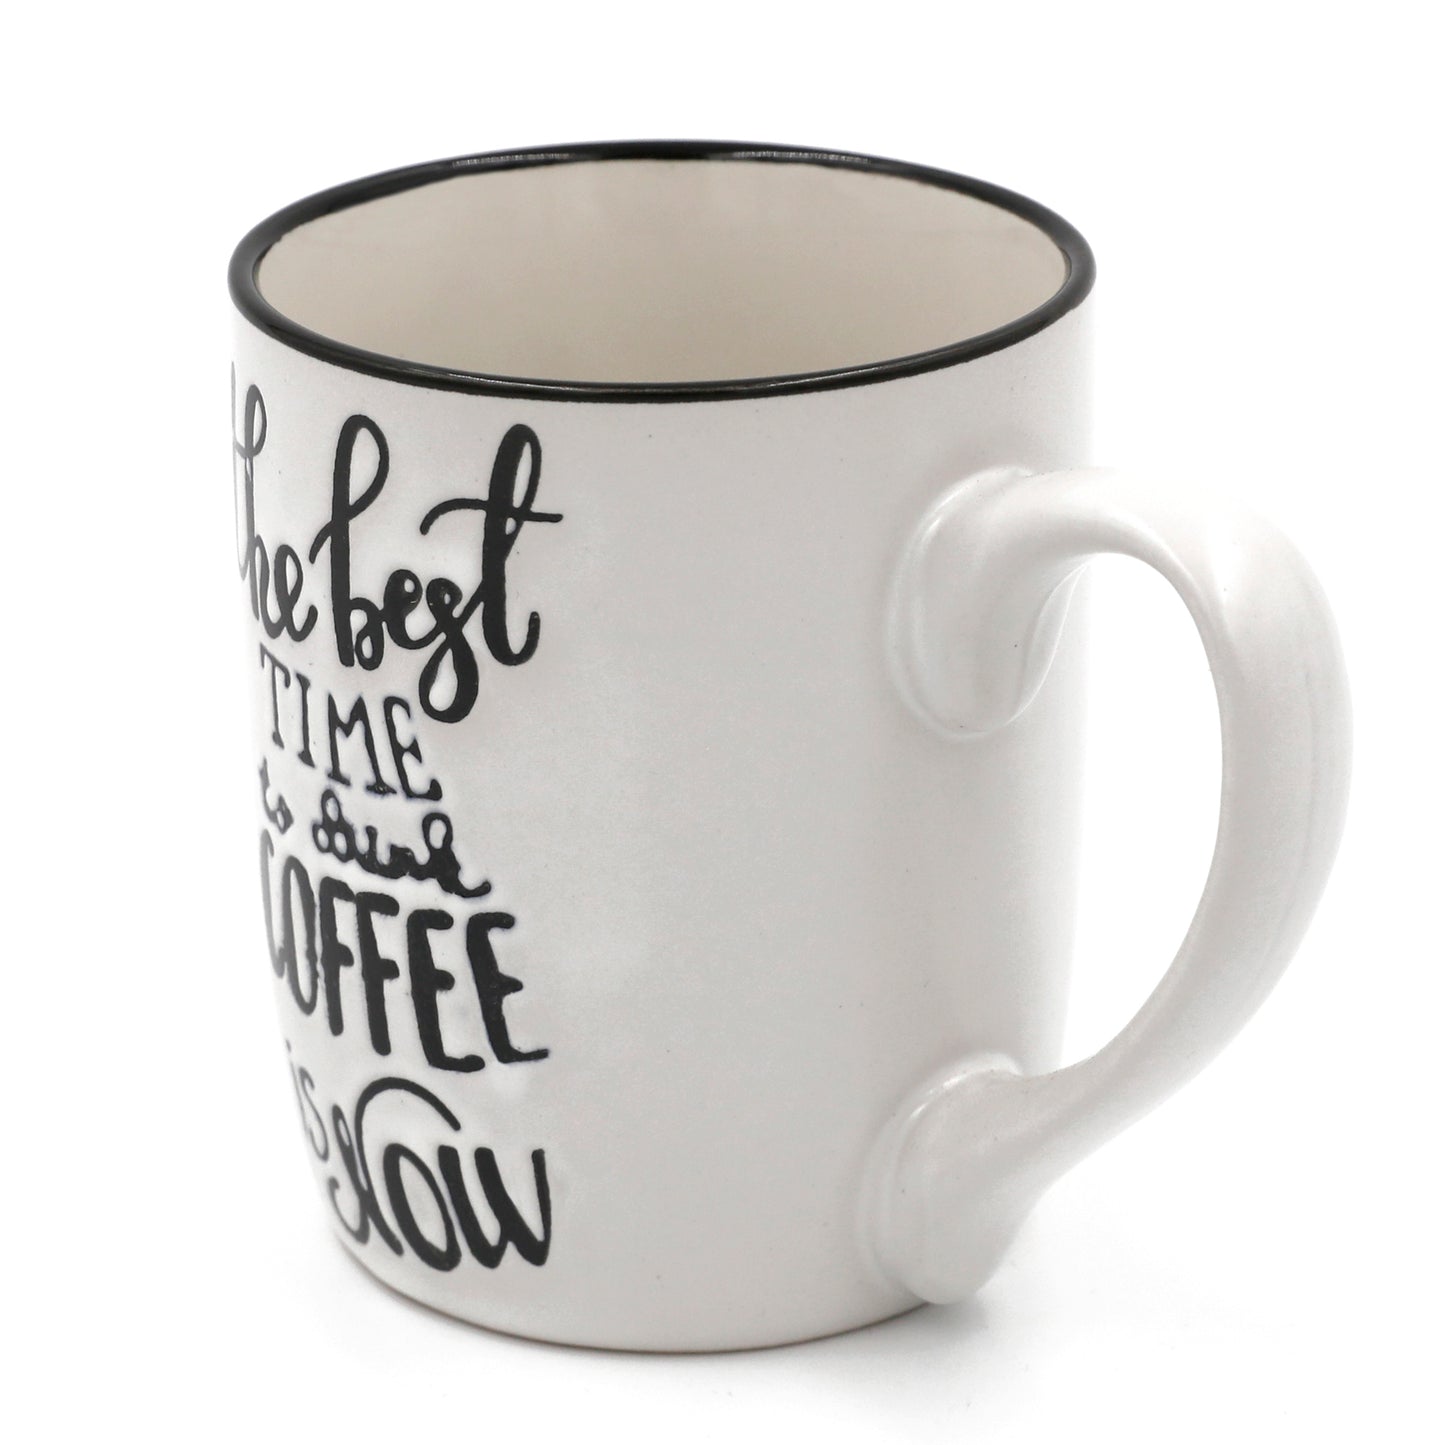 13 oz White Vintage Stoneware Coffee Mugs With Quotes,"The Best Time to Drink Coffee is Now"